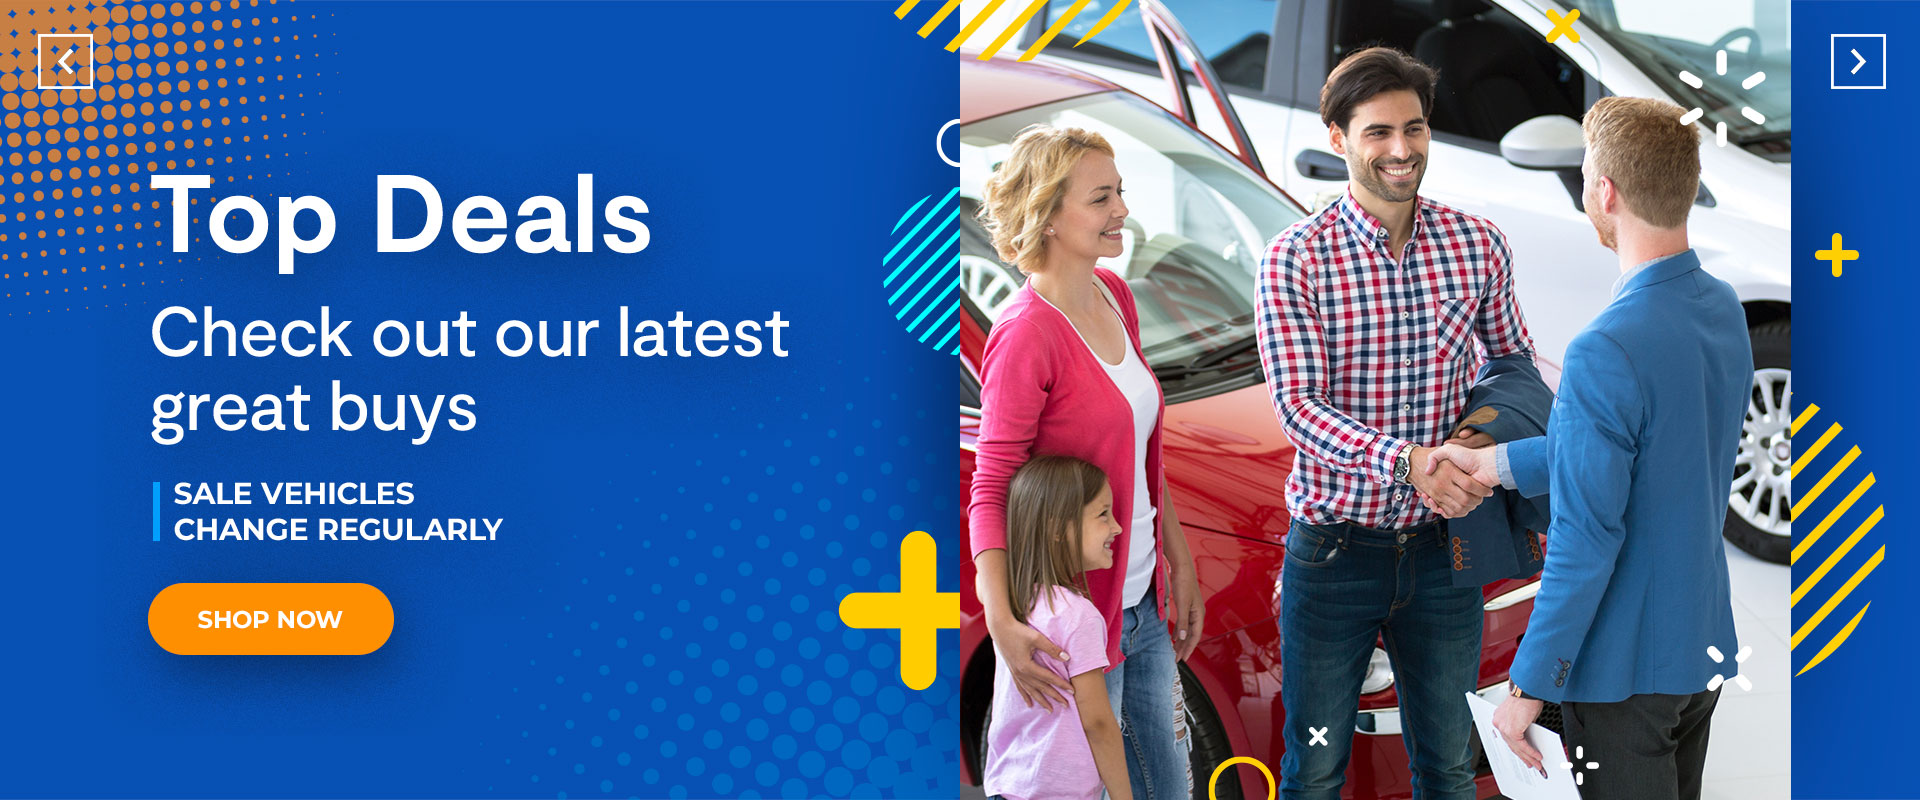 Top Deals. Check out our latest great buys. Sale vehicles change regularly. Shop now. 